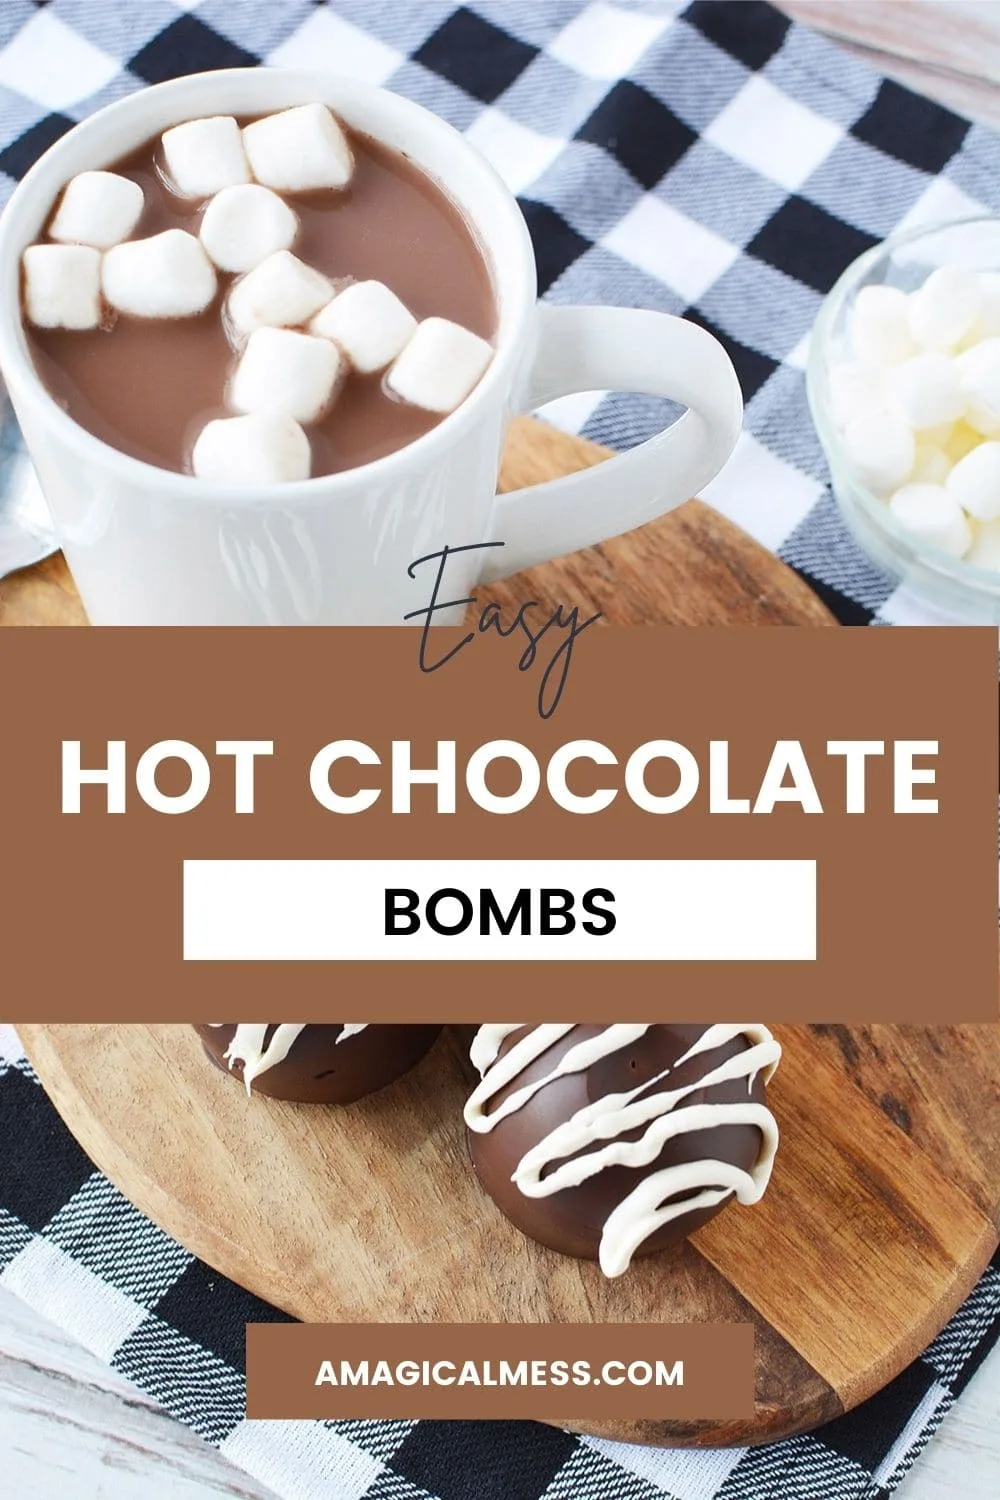 Mug full of hot cocoa next to hot chocolate bombs on a board.